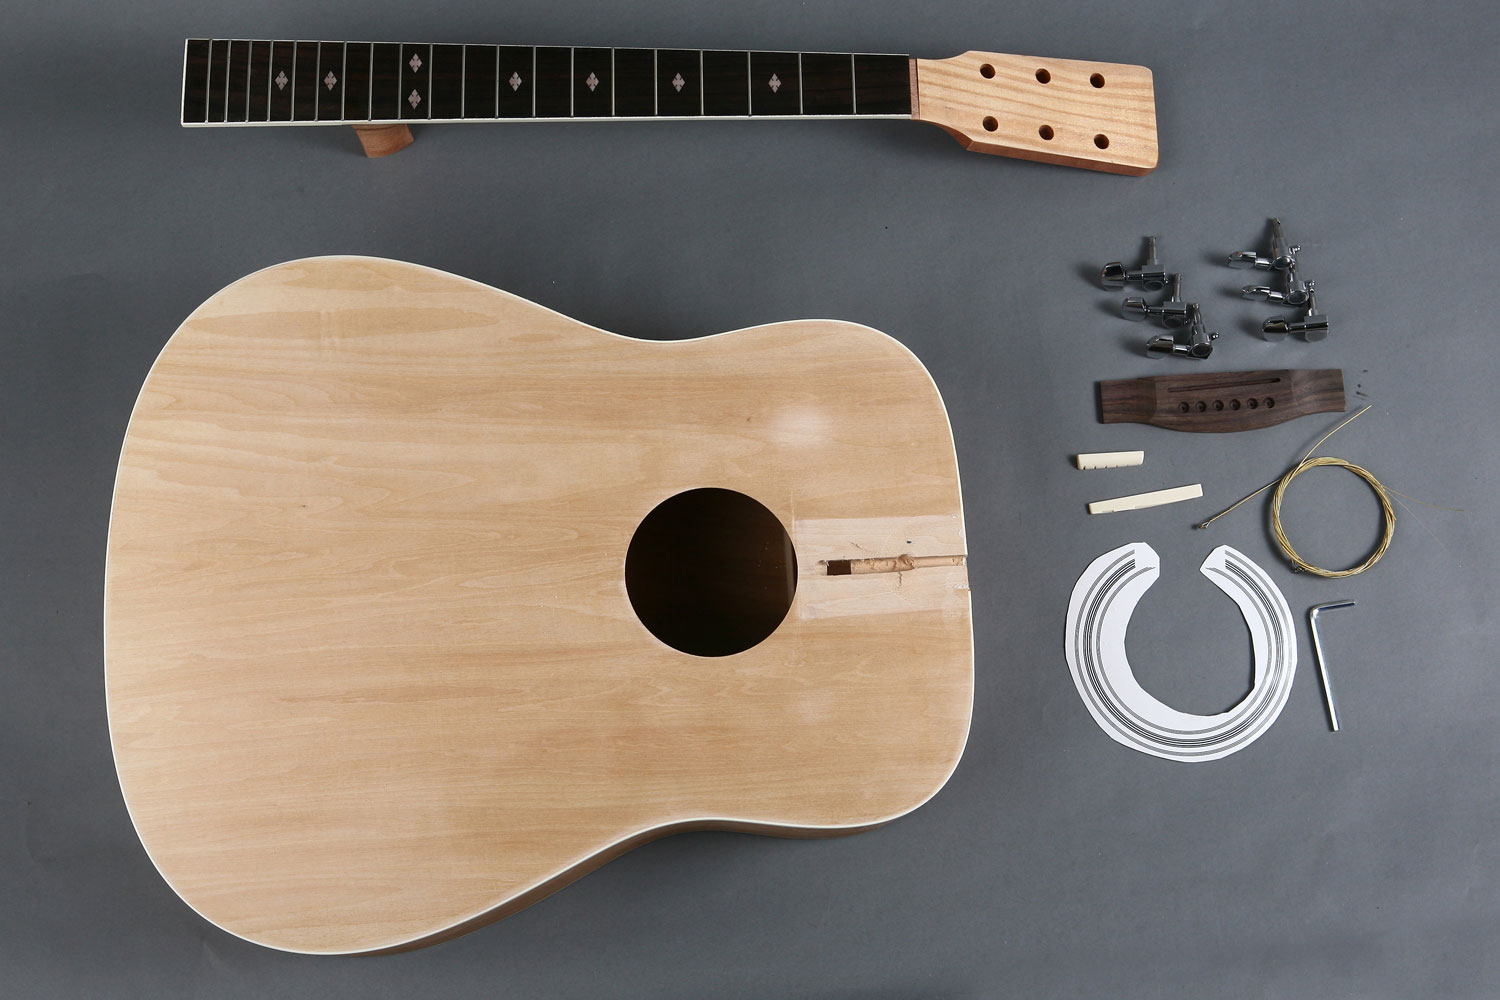 Including Unfinished Spruce Wood LoveinDIY Professional 41 Inch Acoustic Guitar DIY Kit